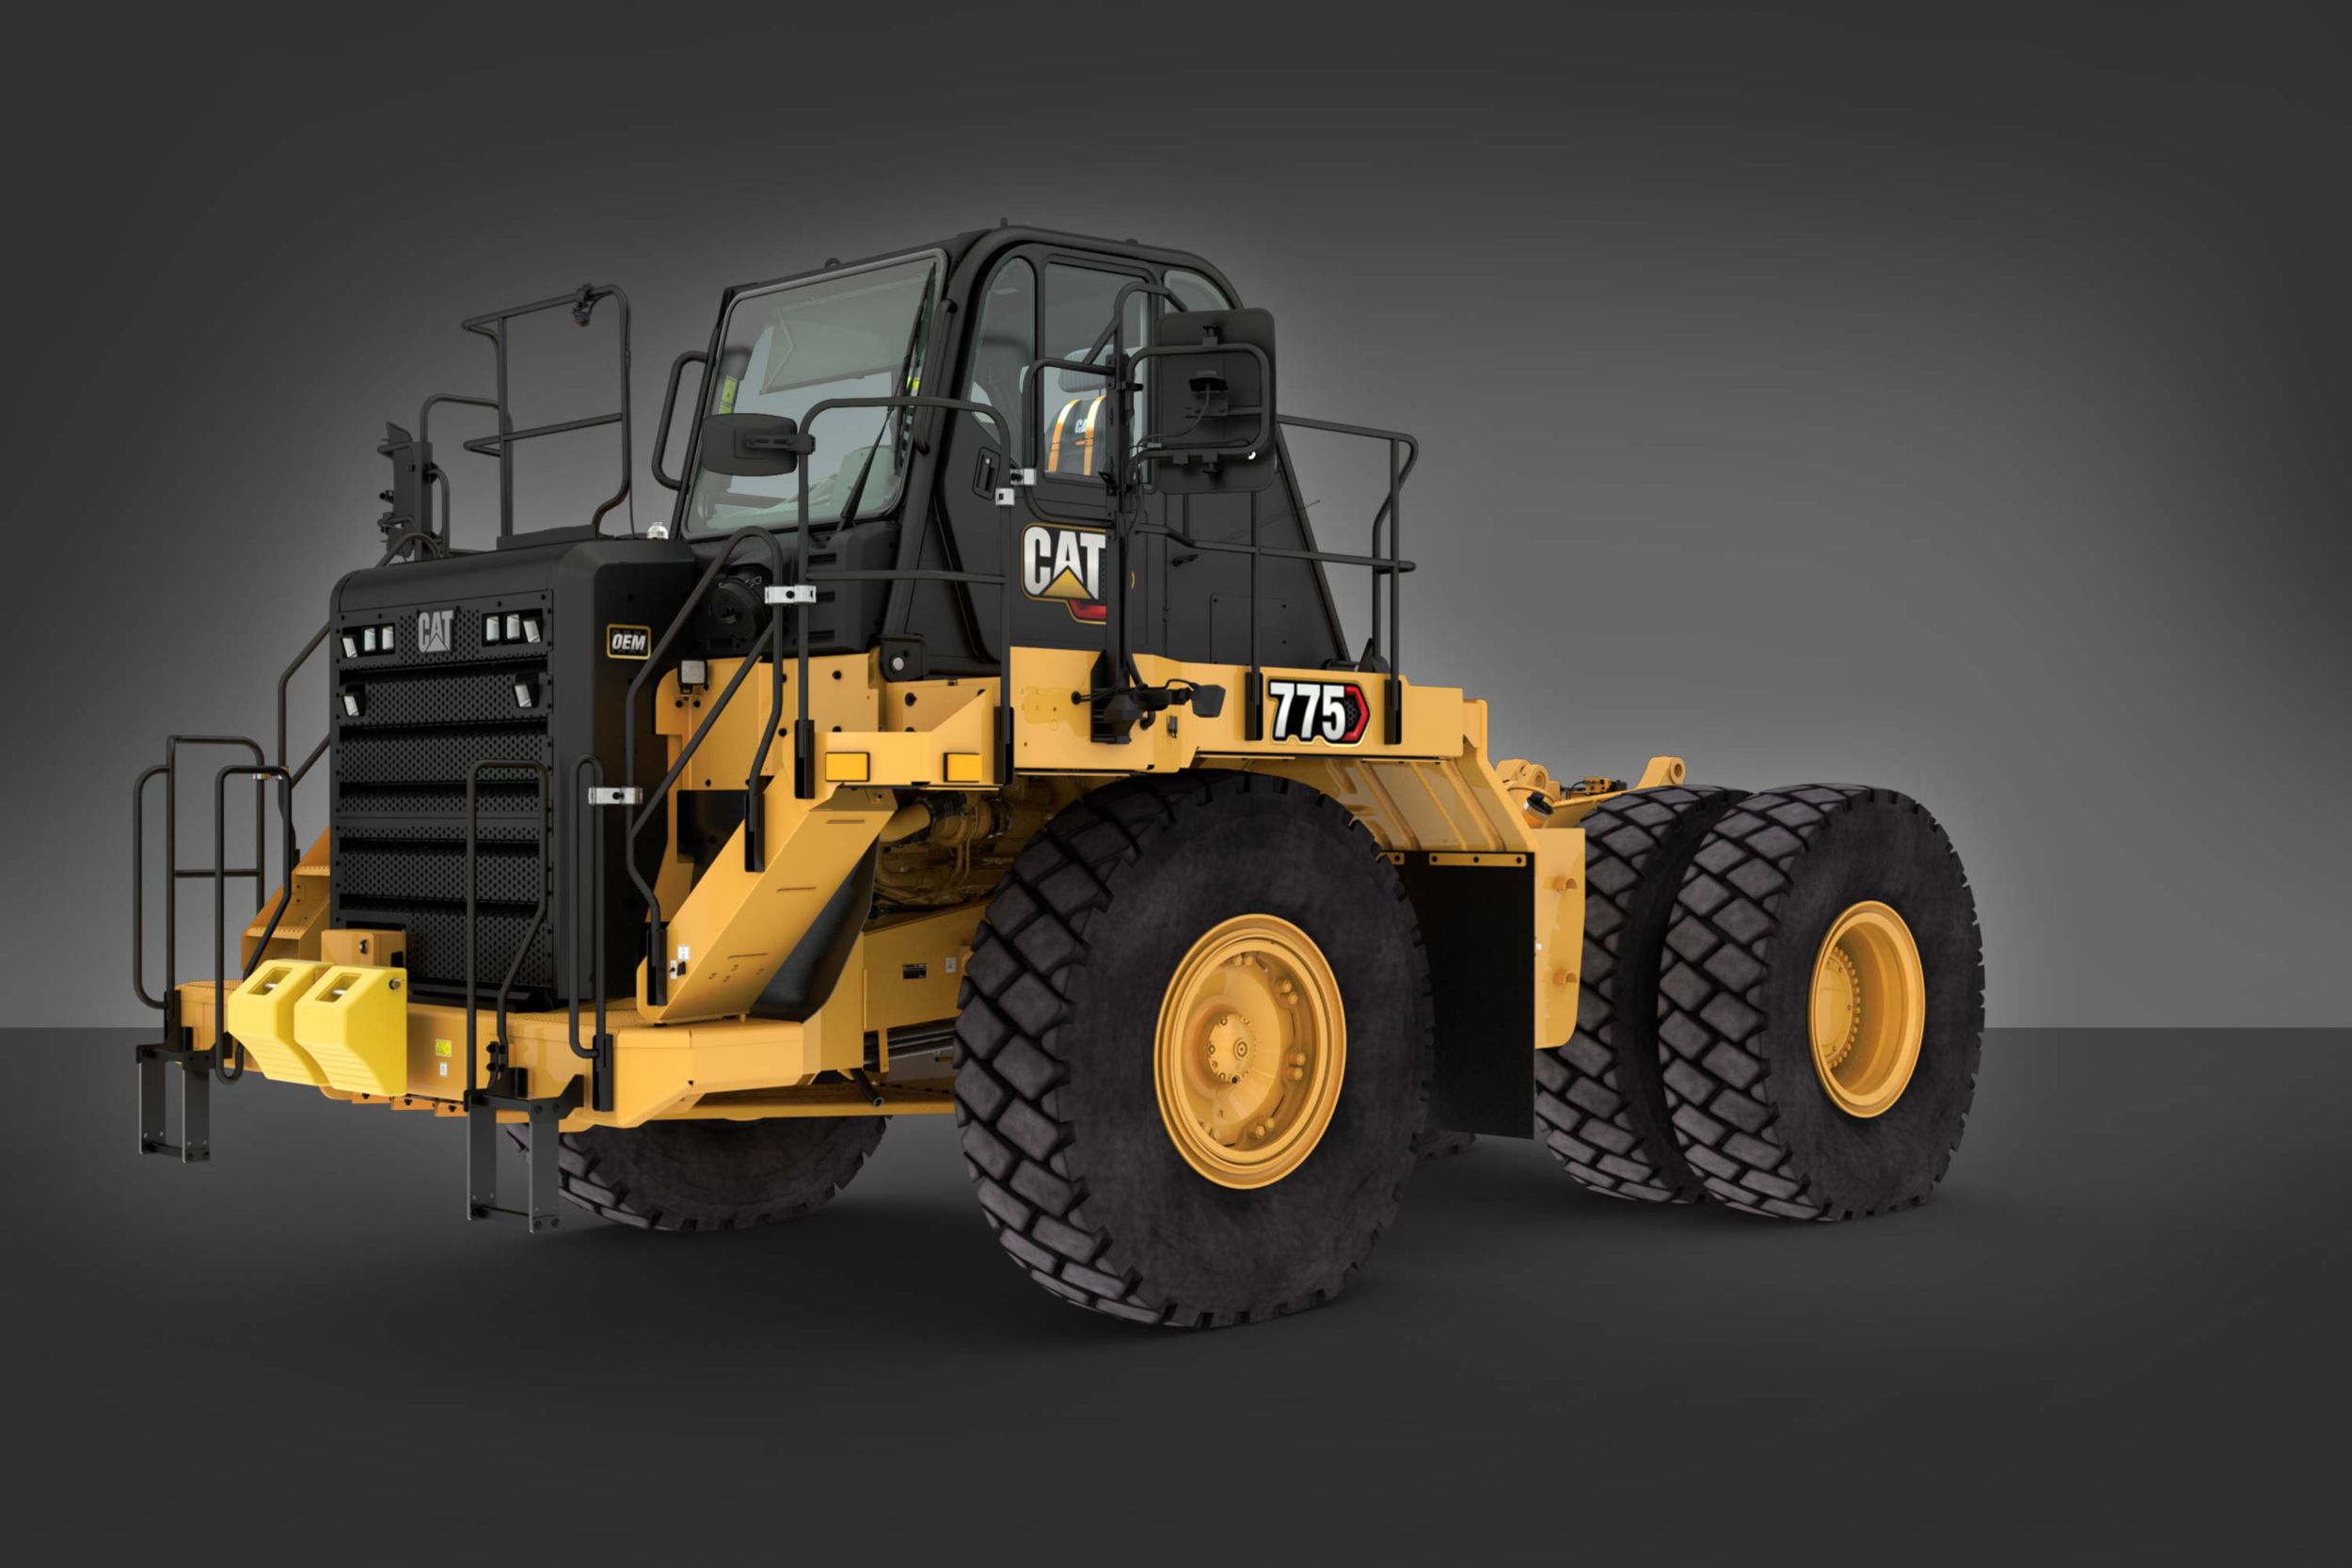 The Cat 775 bare chassis comes equipped with a higher Tractor ROPS certification ratings needed for specialty machines including water trucks, tow trucks, and fuel and lube trucks.